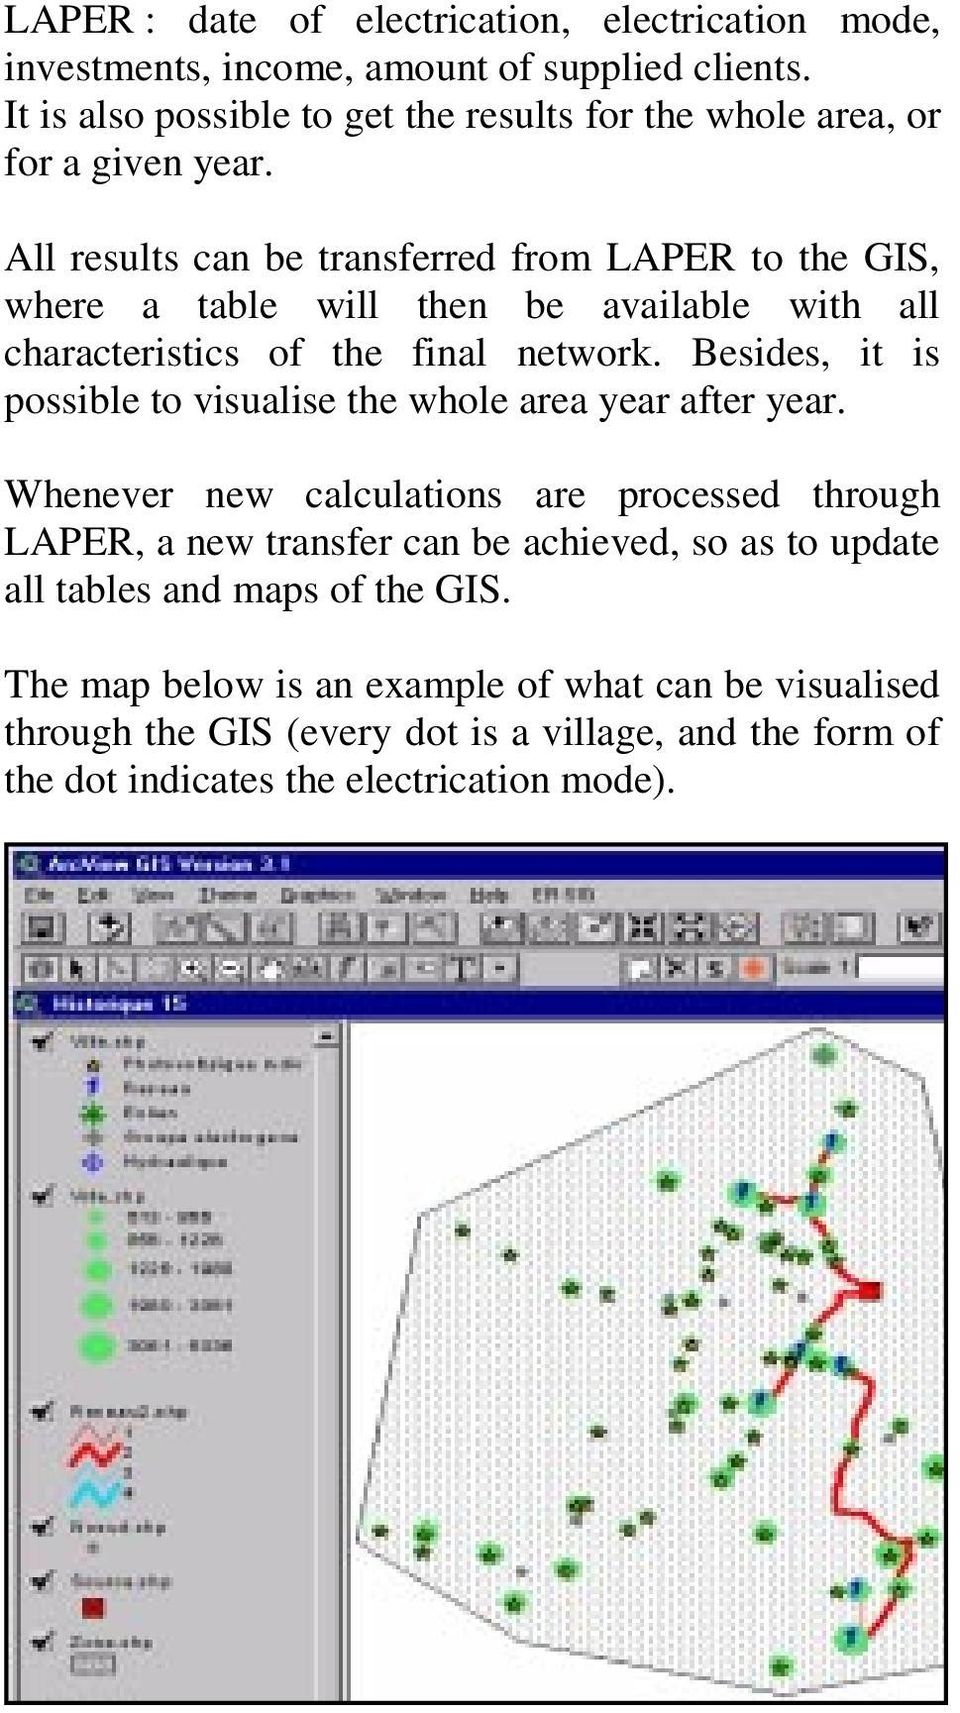 All results can be transferred from LAPER to the GIS, where a table will then be available with all characteristics of the final network.